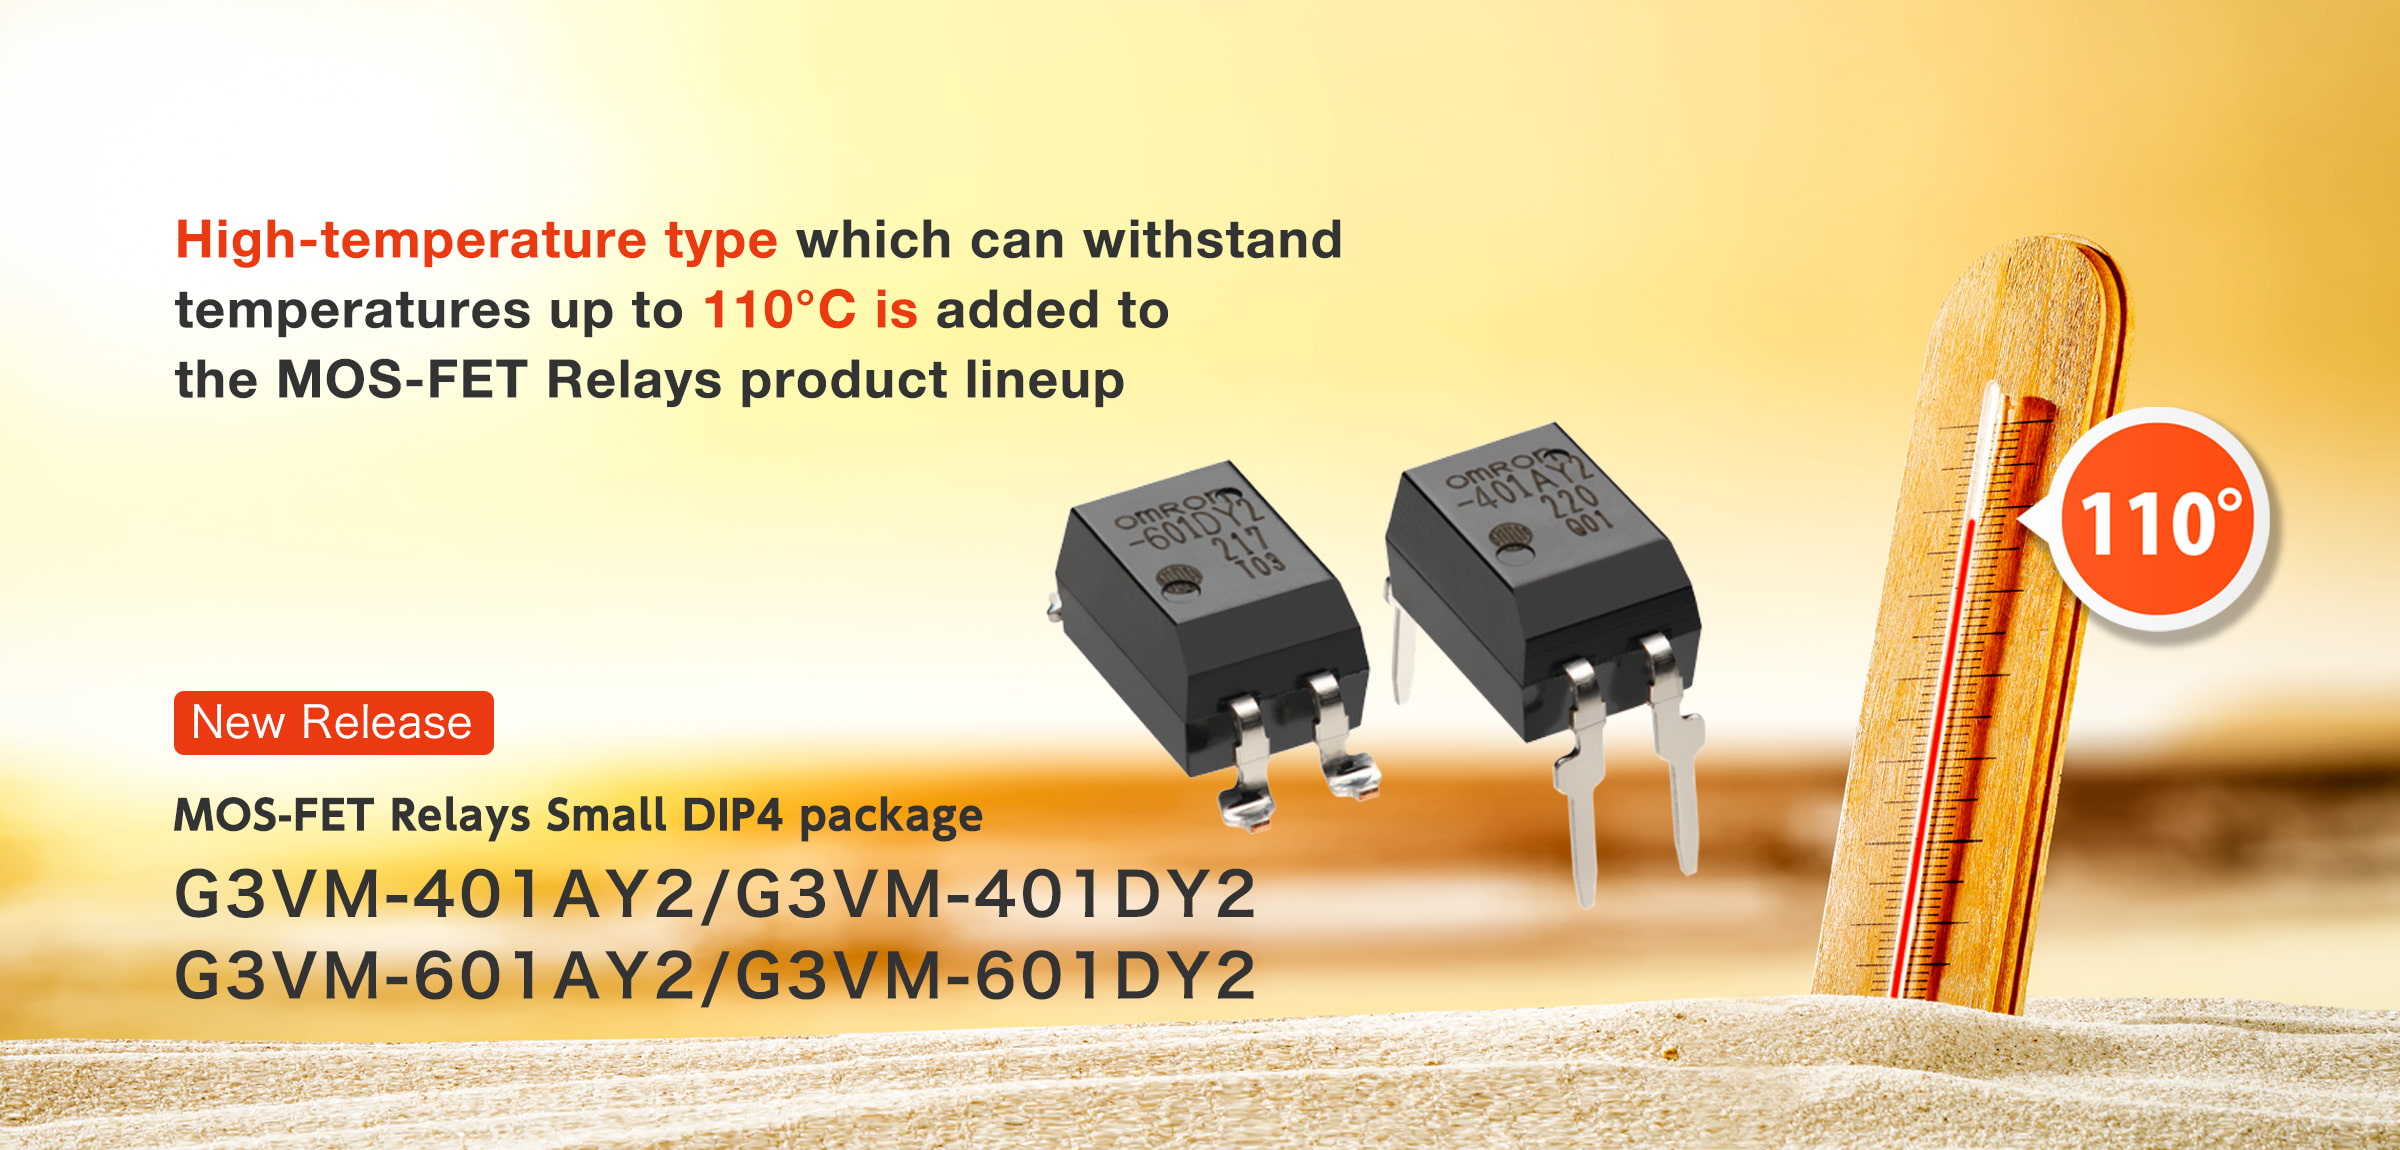 High-temperature type which can withstand temperatures up to 110°C is added to the MOS-FET Relays product lineup MOS-FET Relays Small DIP4 package G3VM-401AY2/G3VM-401DY2, G3VM-601AY2/G3VM-601DY2